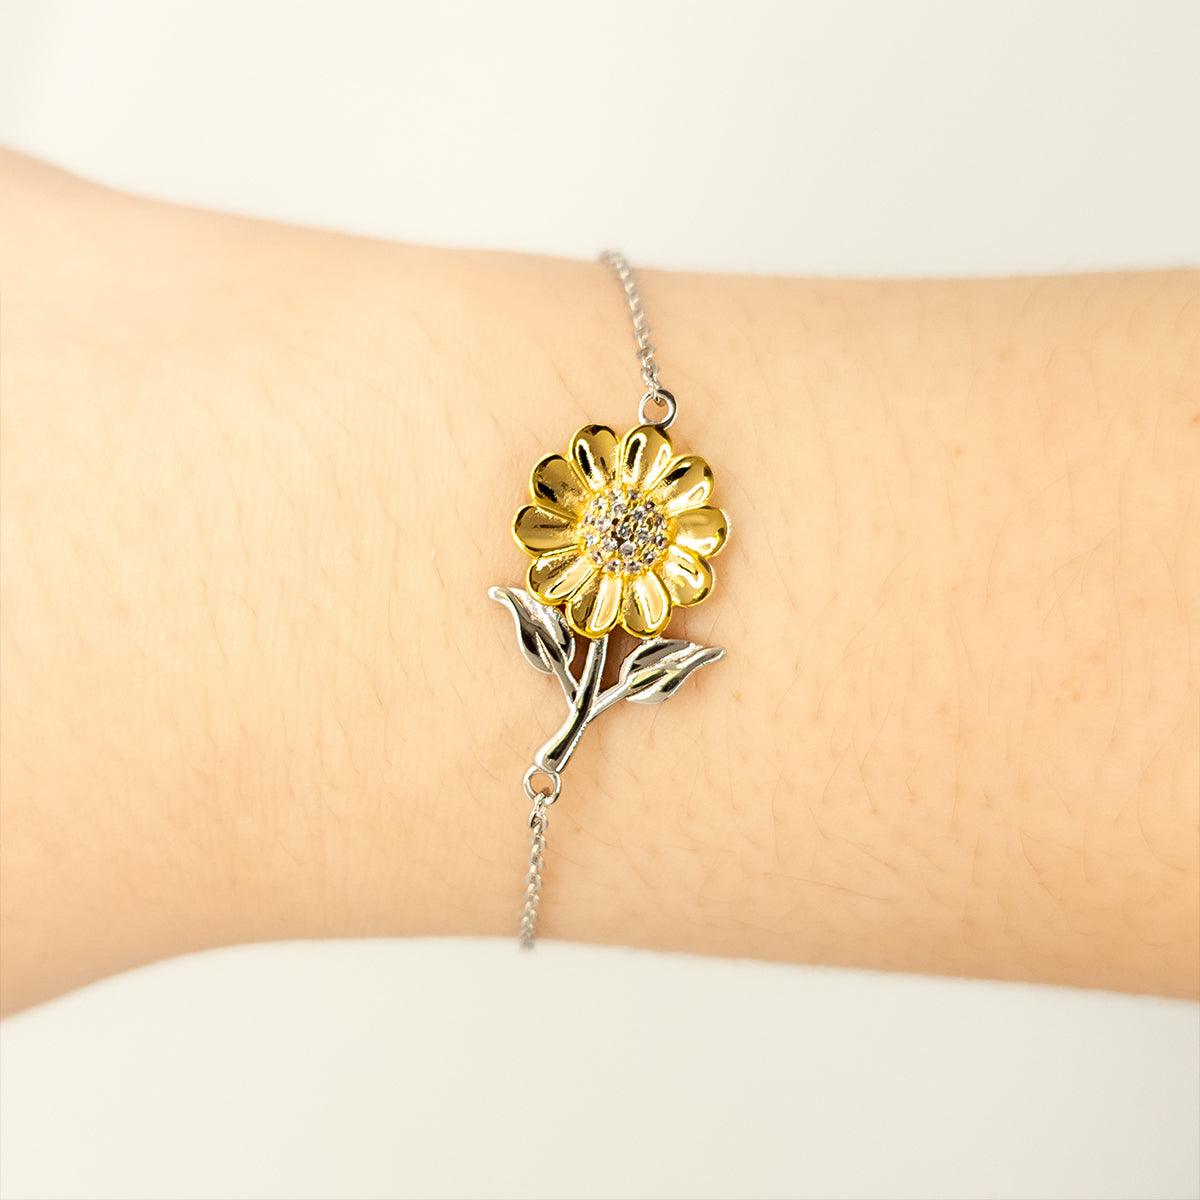 Maryland is my home Gifts, Lovely Maryland Birthday Christmas Sunflower Bracelet For People from Maryland, Men, Women, Friends - Mallard Moon Gift Shop